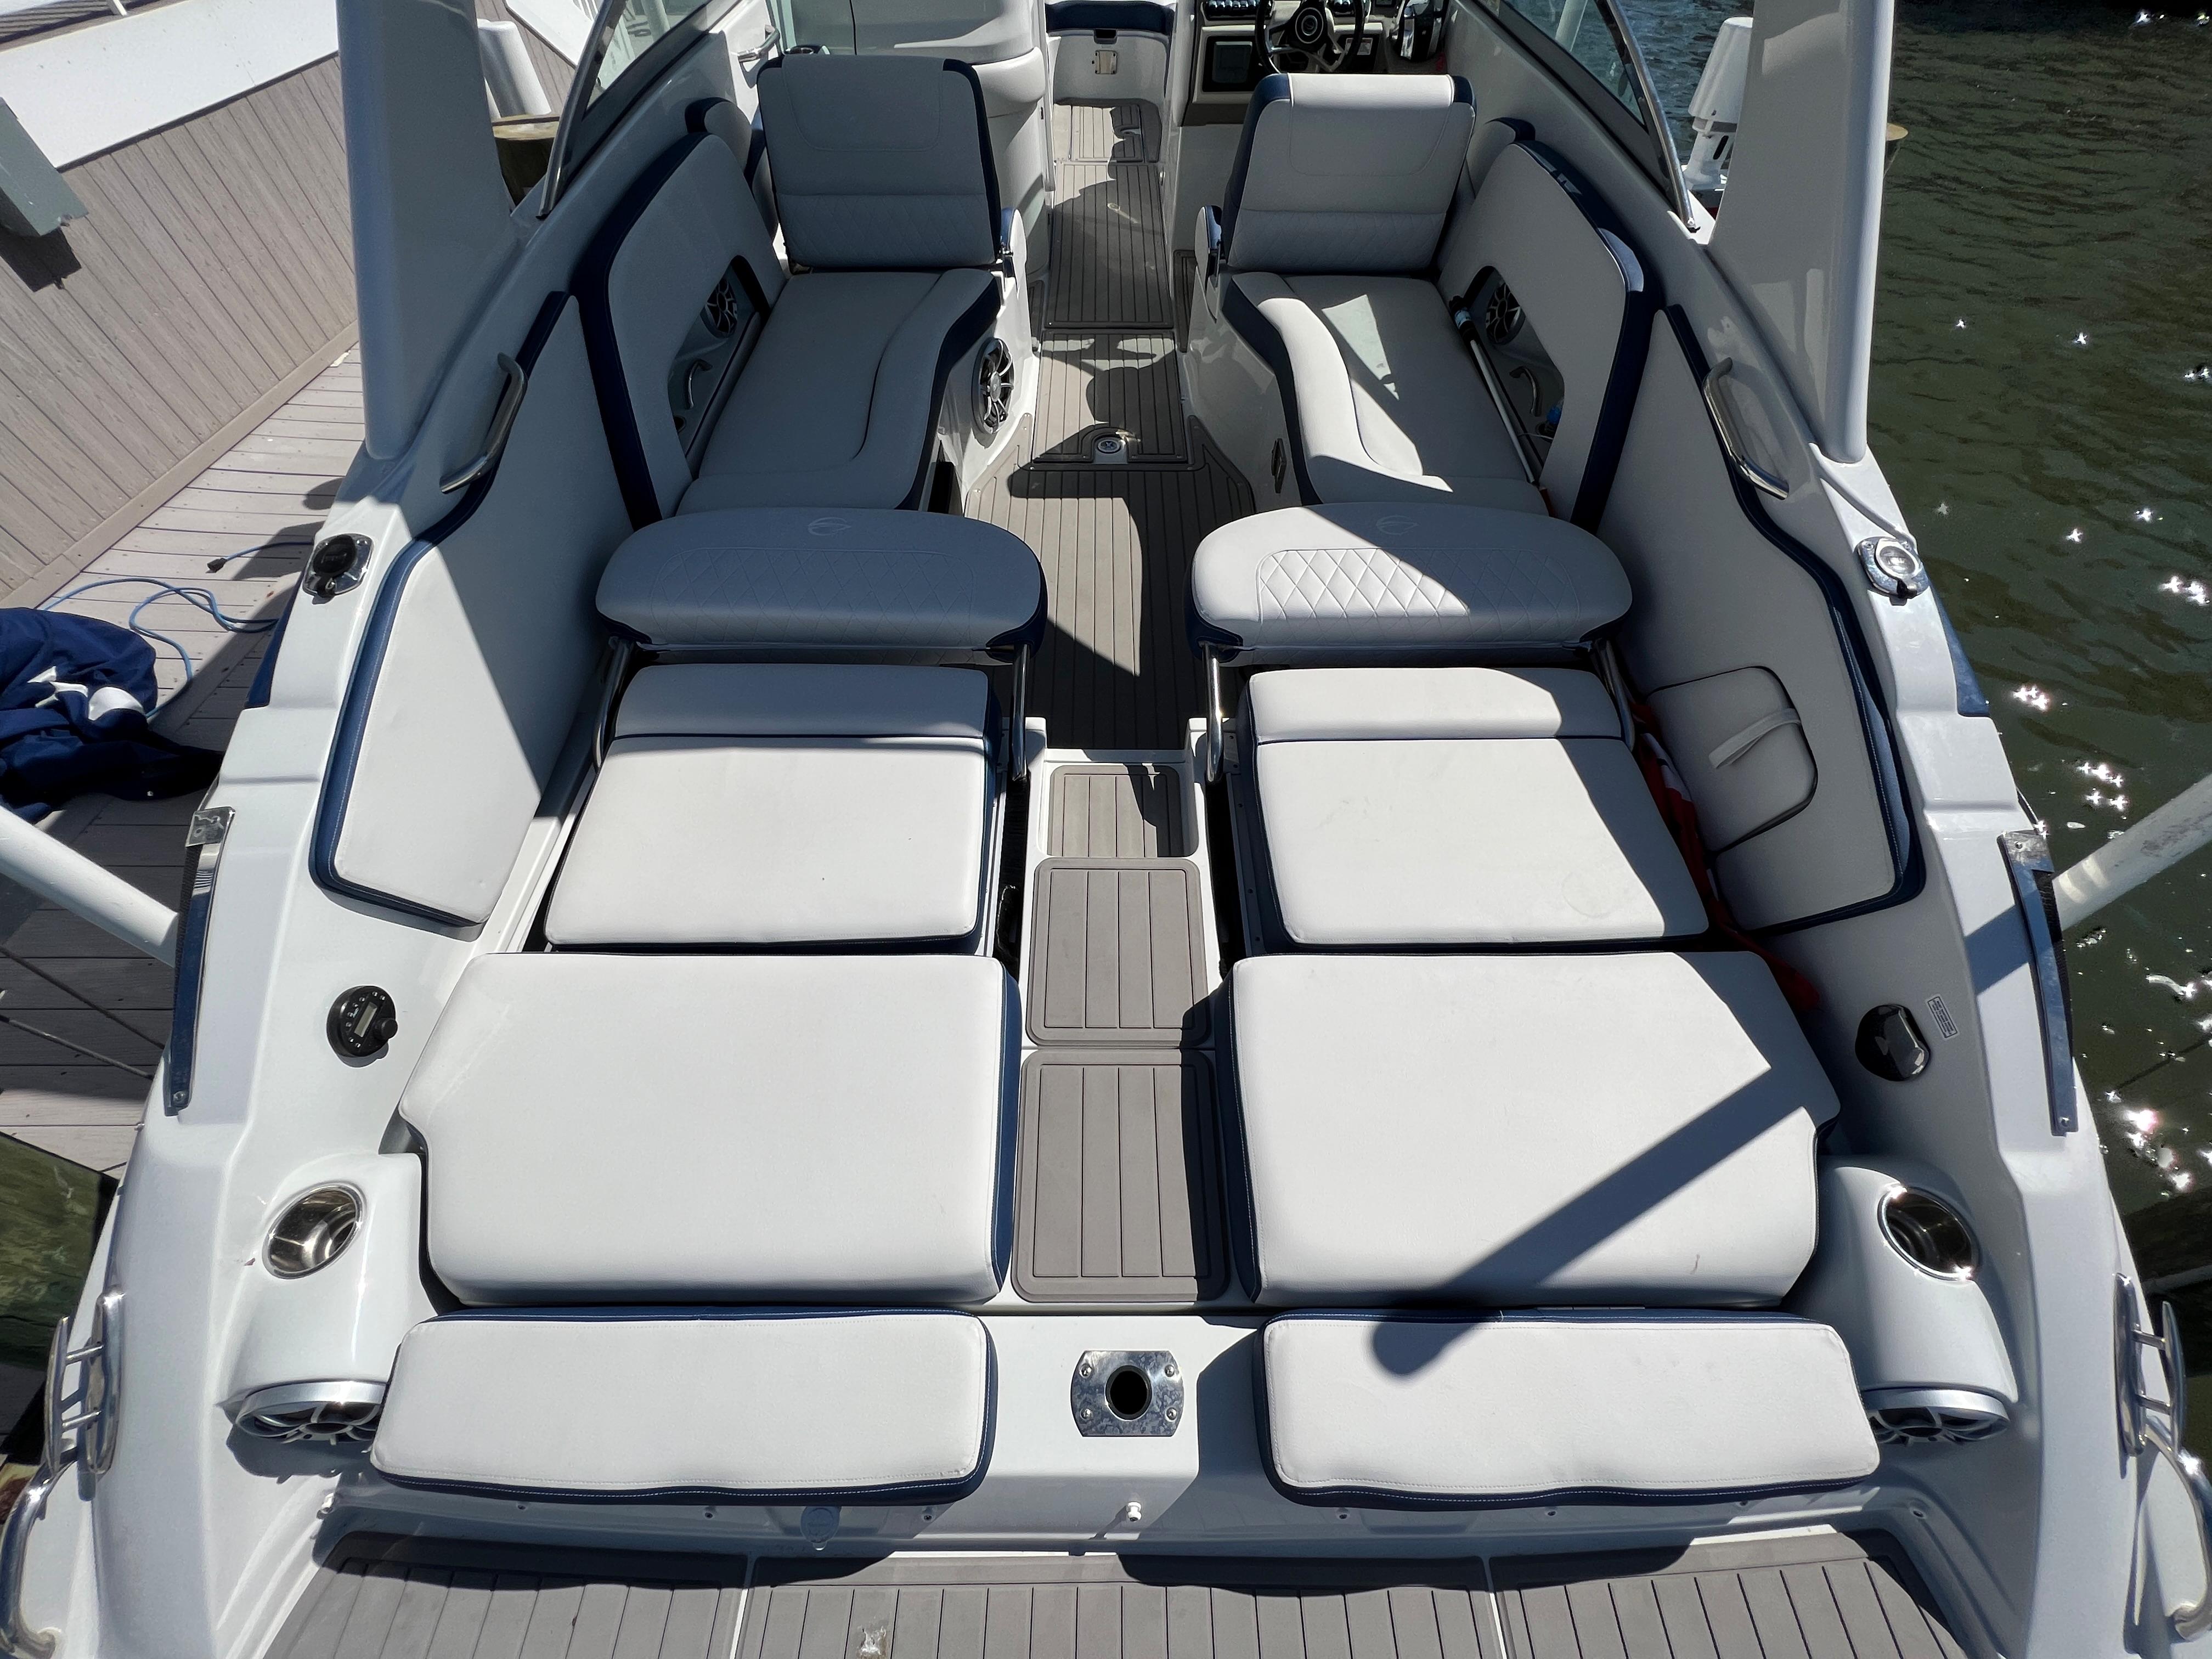 2022 Crownline E305 XS Aft Seating with Backrests Down 2